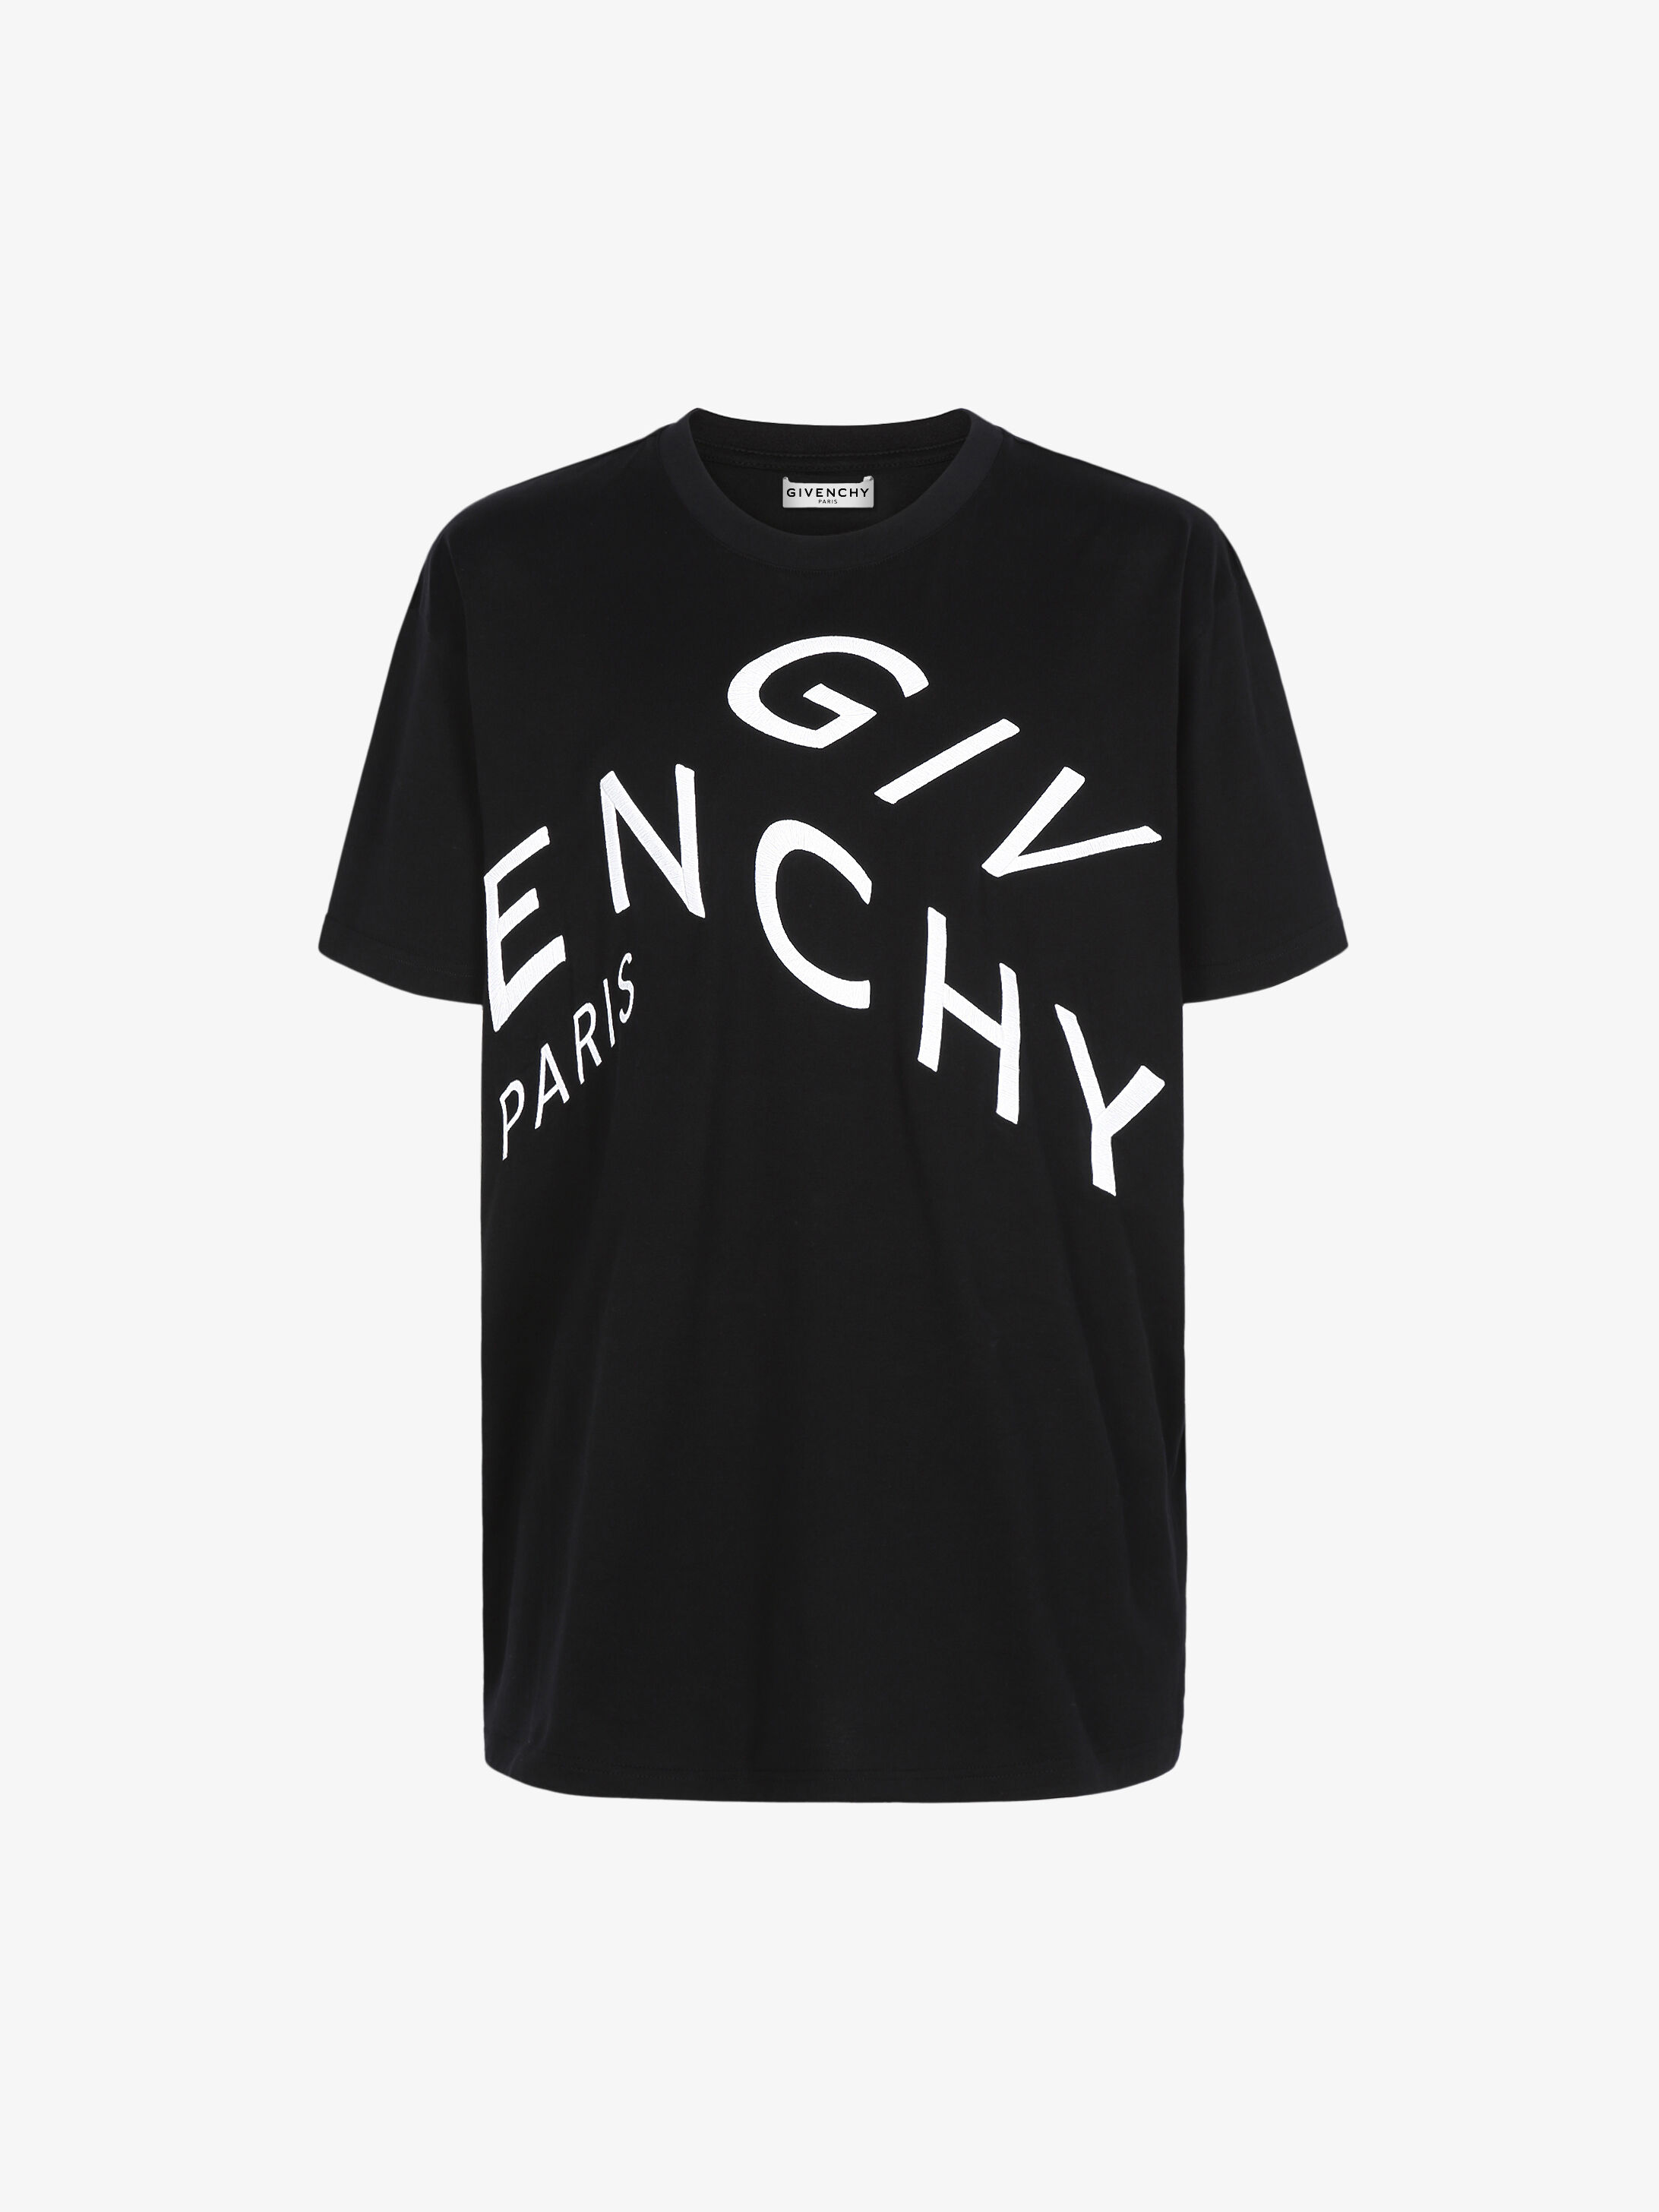 givenchy t shirt price in rupees